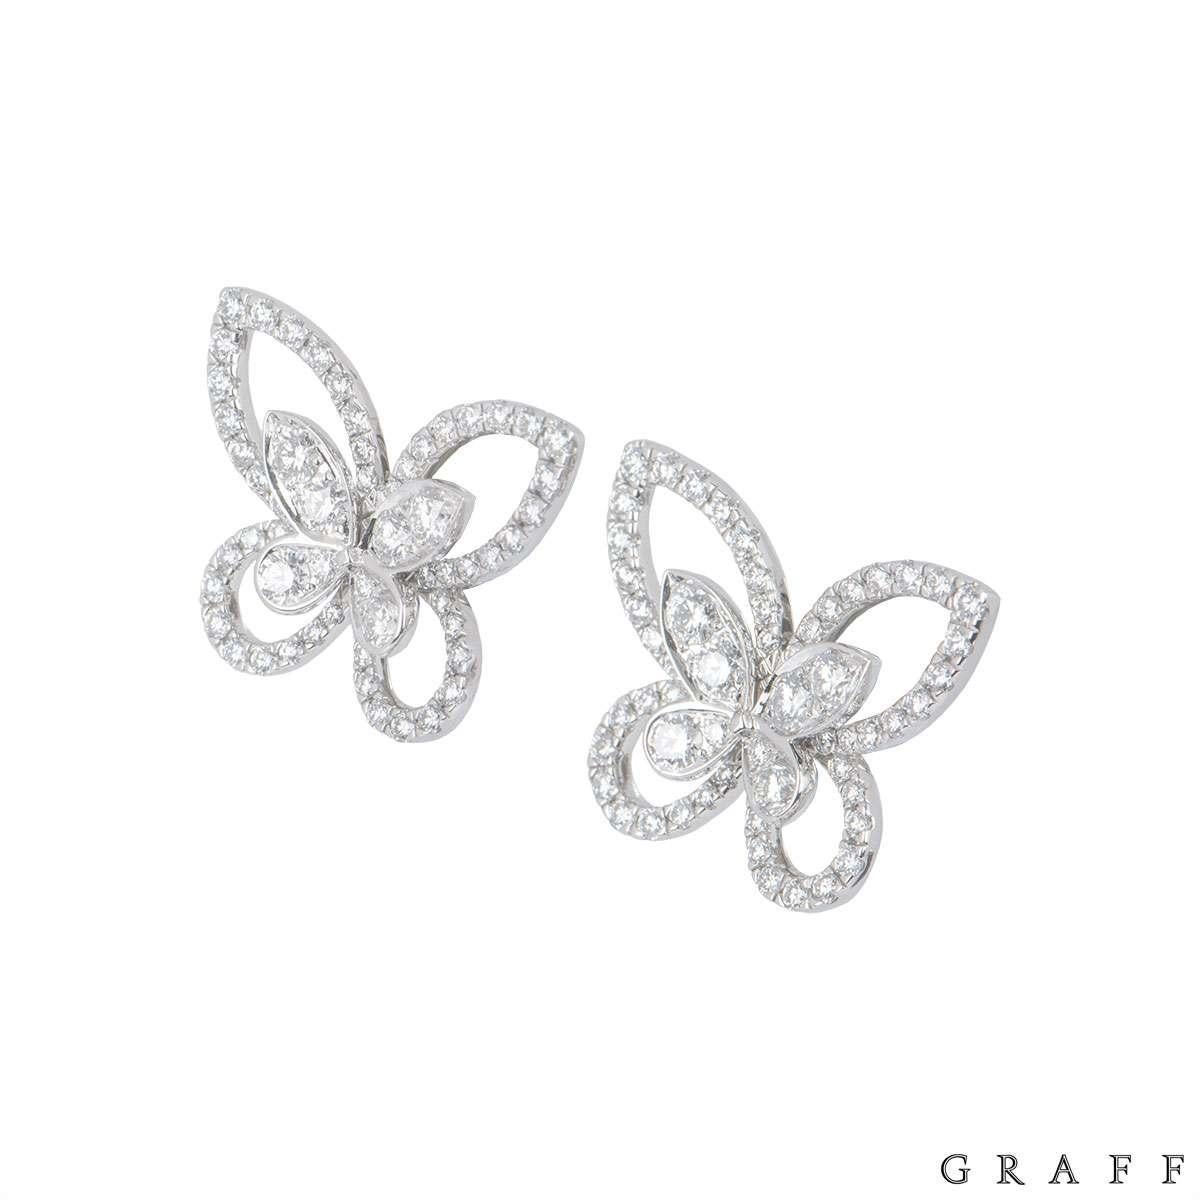 An 18k white gold pair of diamond diamond Butterfly earrings by Graff from the Butterfly collection. The earrings feature an openwork Butterfly motif set with round brilliant cut diamonds with a total weight of 1.23ct. The earrings measure 1.9cm x